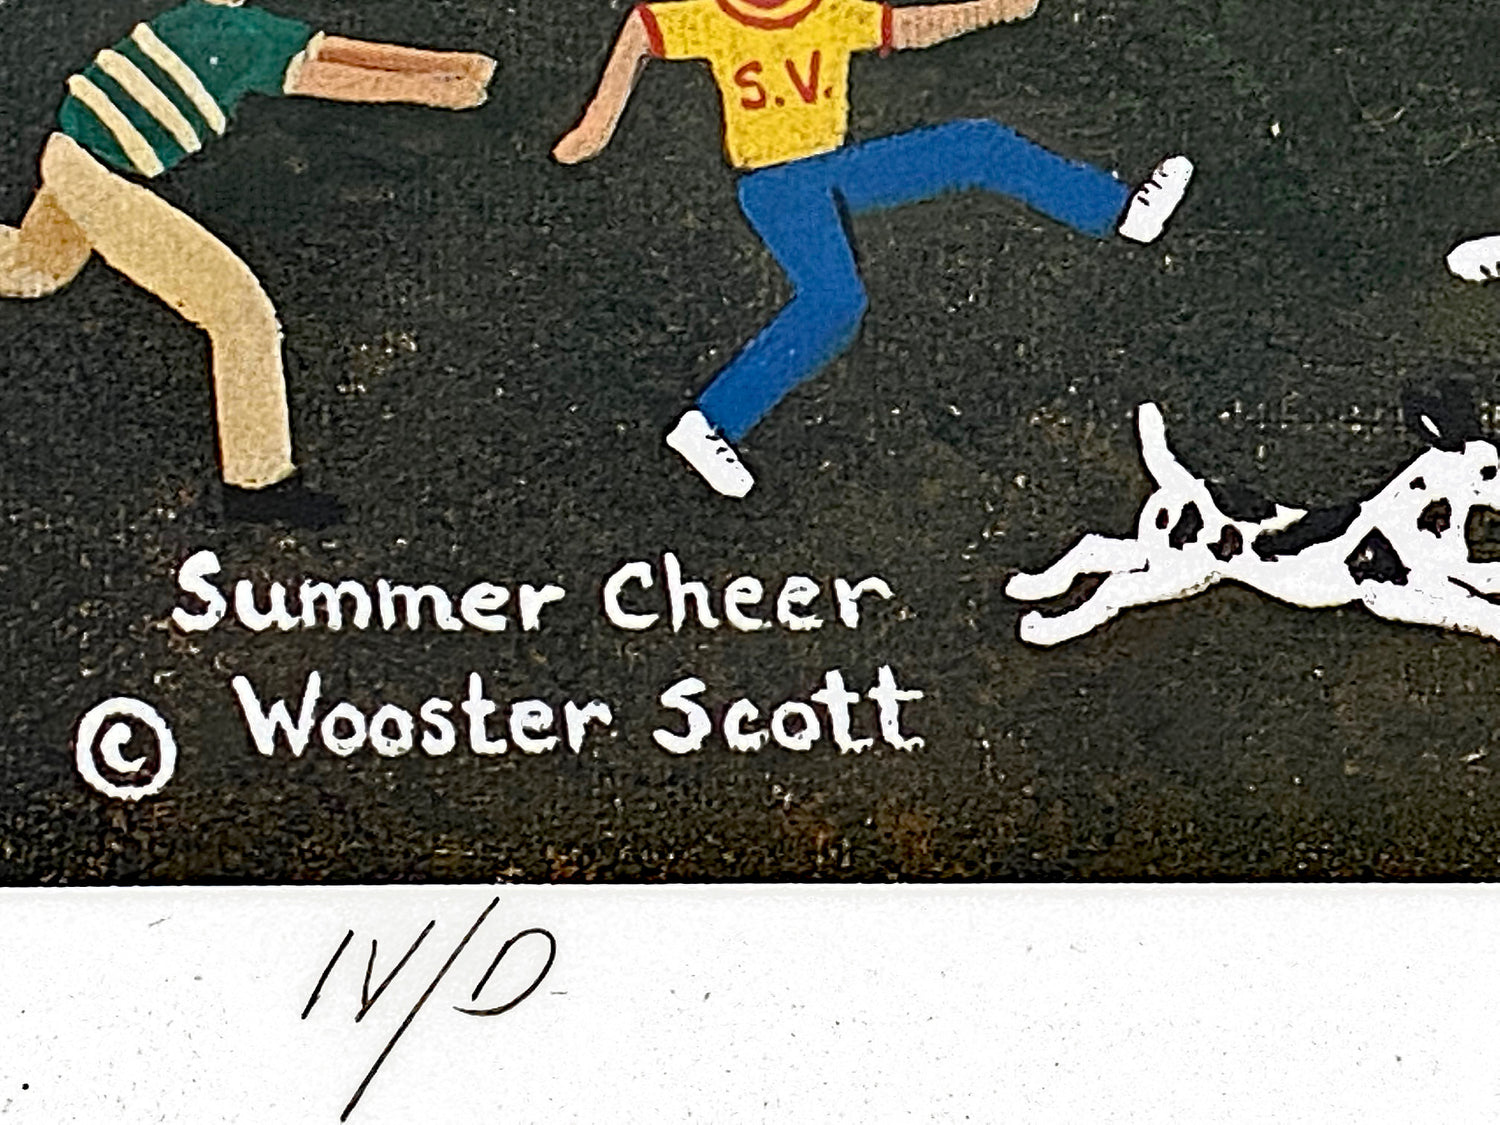 Summer Cheer Jane Wooster Scott Offset Lithograph Print Artist Hand Signed and Roman Numeral Numbered